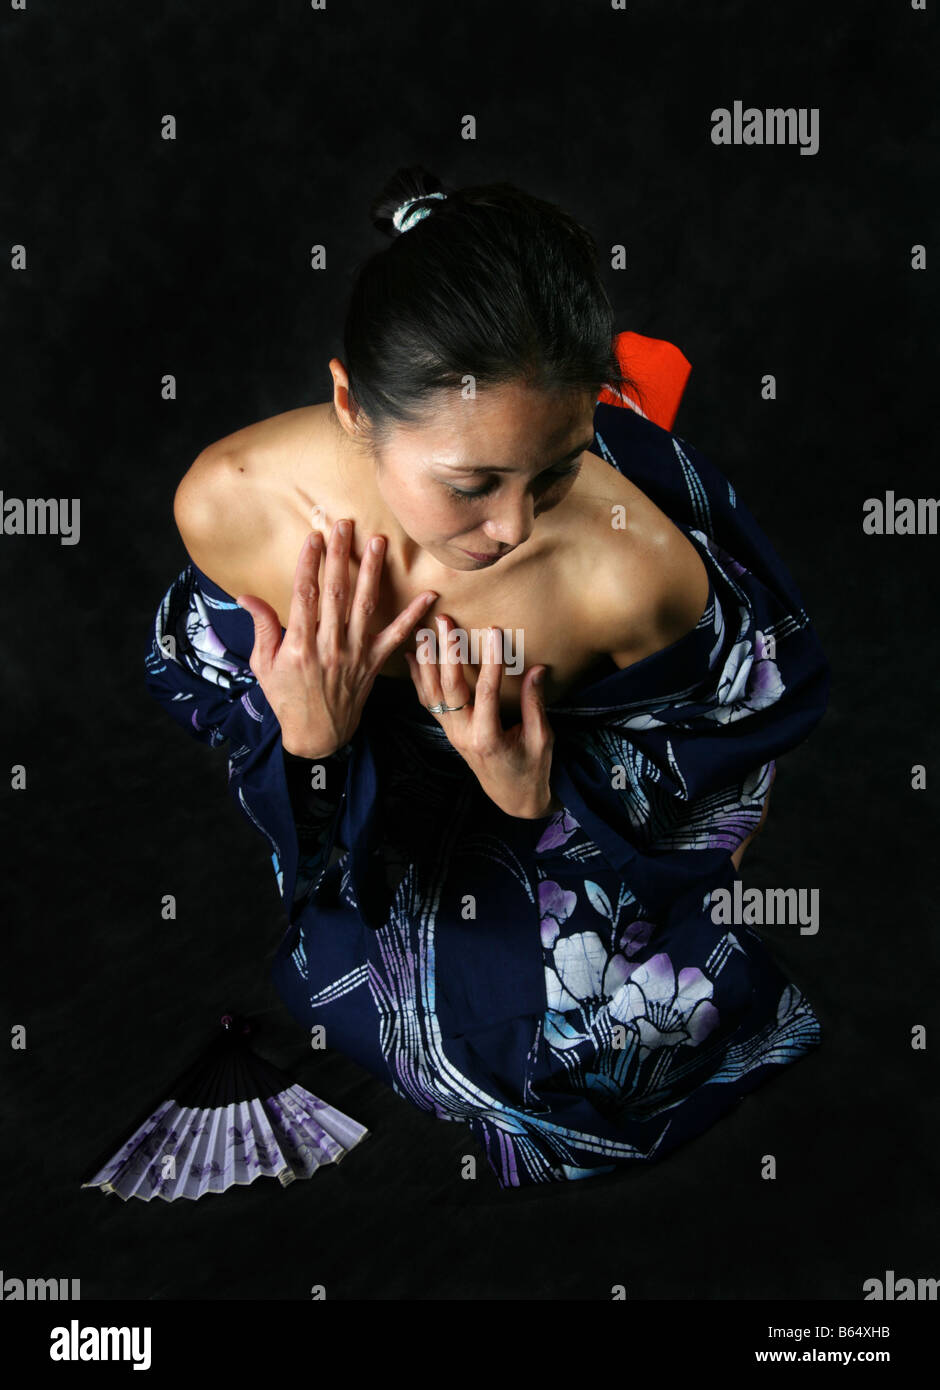 Japanese Woman in a Blue Kimono, Kneeling in a Submissive Position Stock Photo